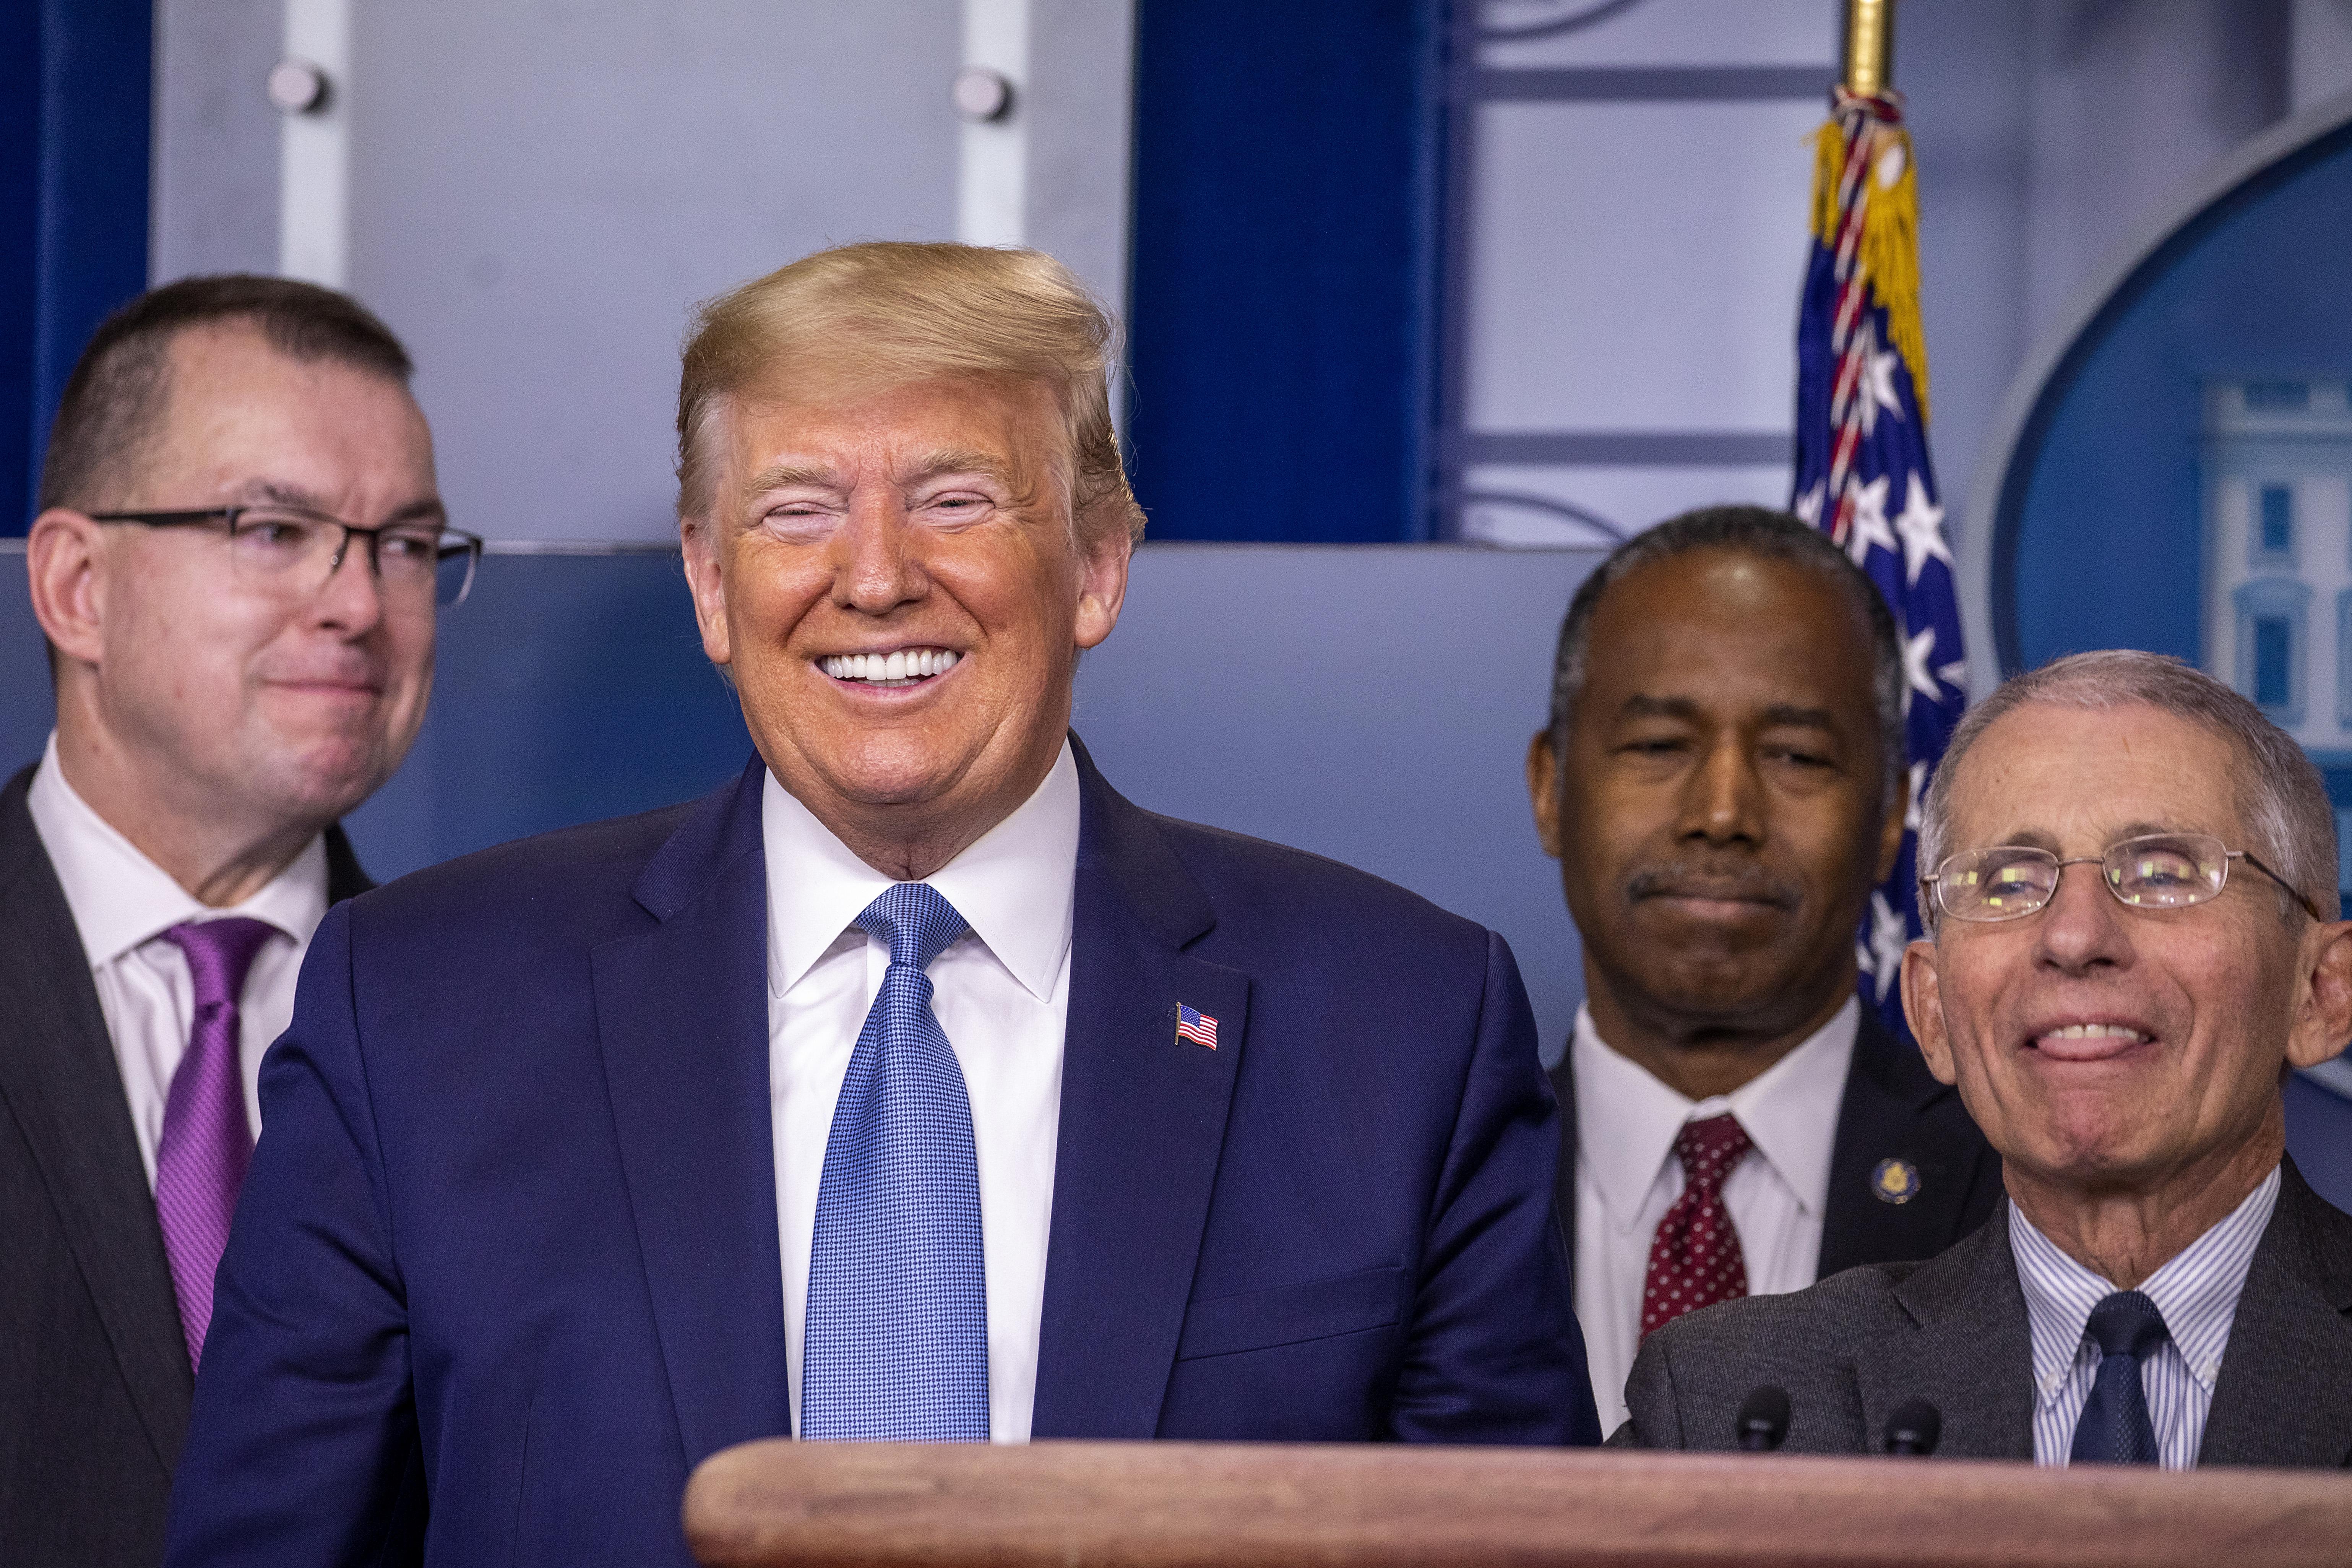 President Donald Trump and Anthony Fauci, Director of the National Institute of Allergy and Infectious Diseases, react to a question during a briefing in the James Brady Press Briefing Room at the White House on March 21, 2020 in Washington, D.C.